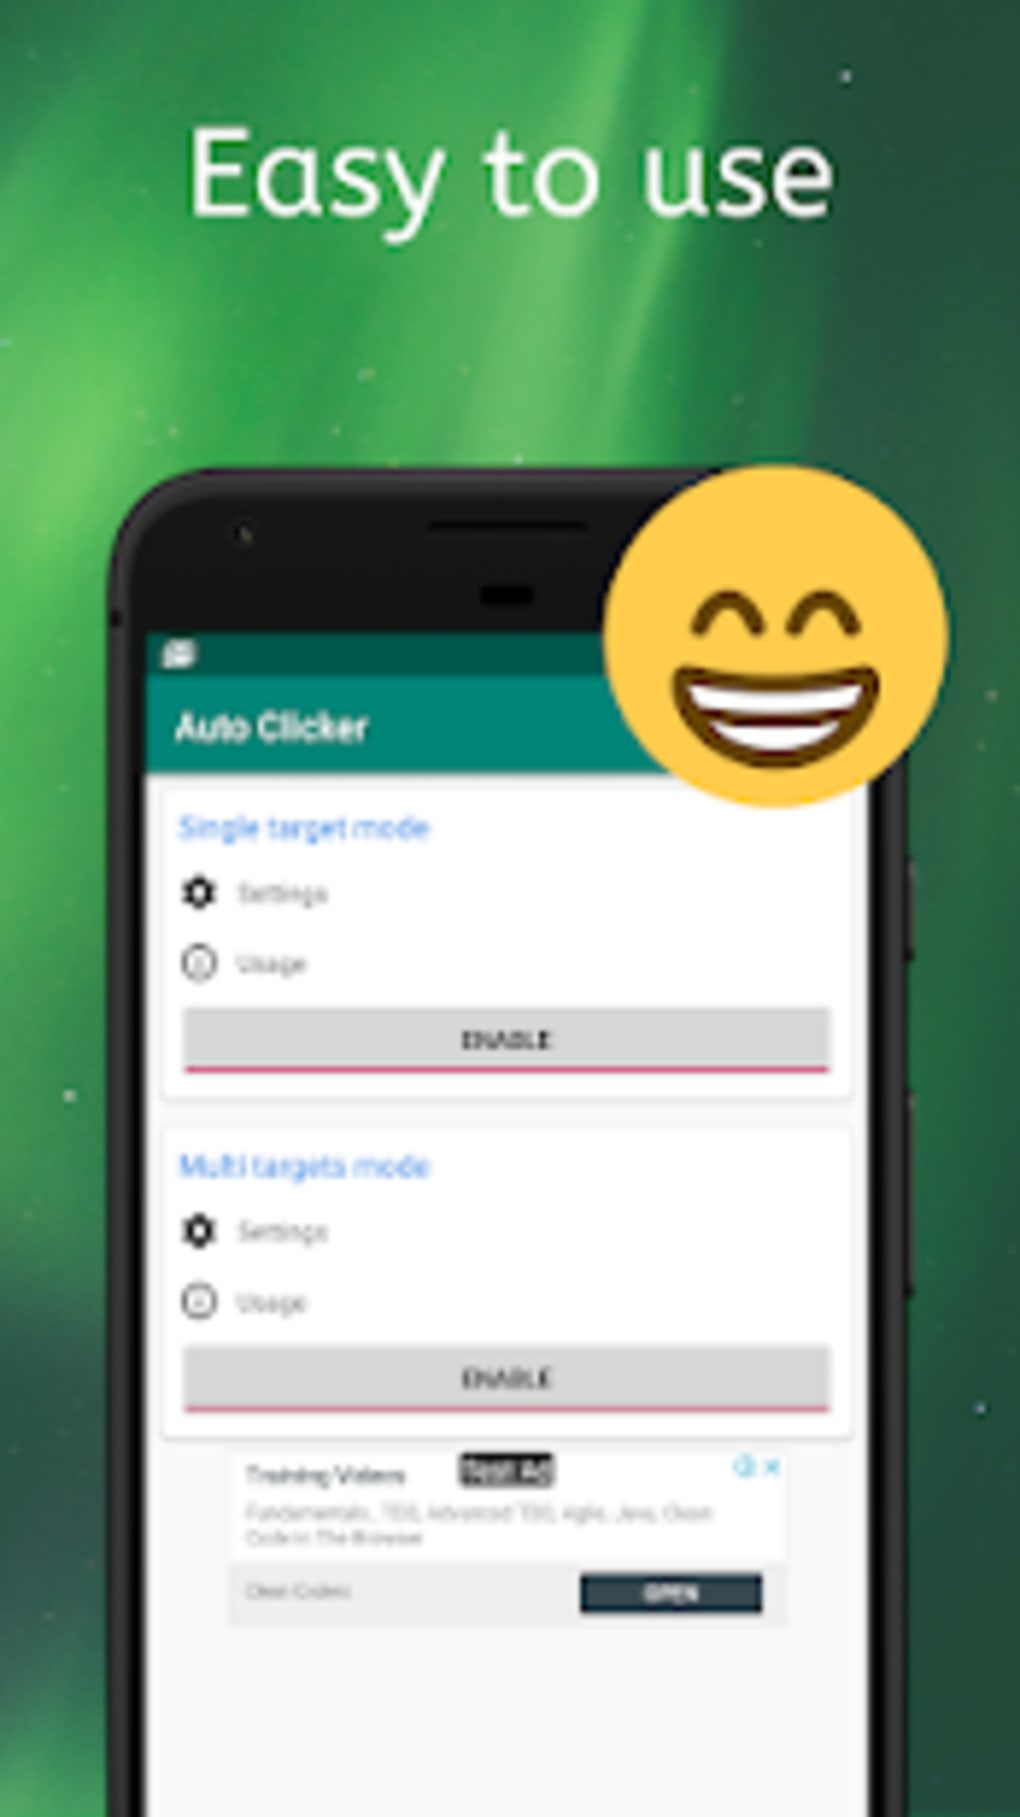 auto clicker for android 6.0.1